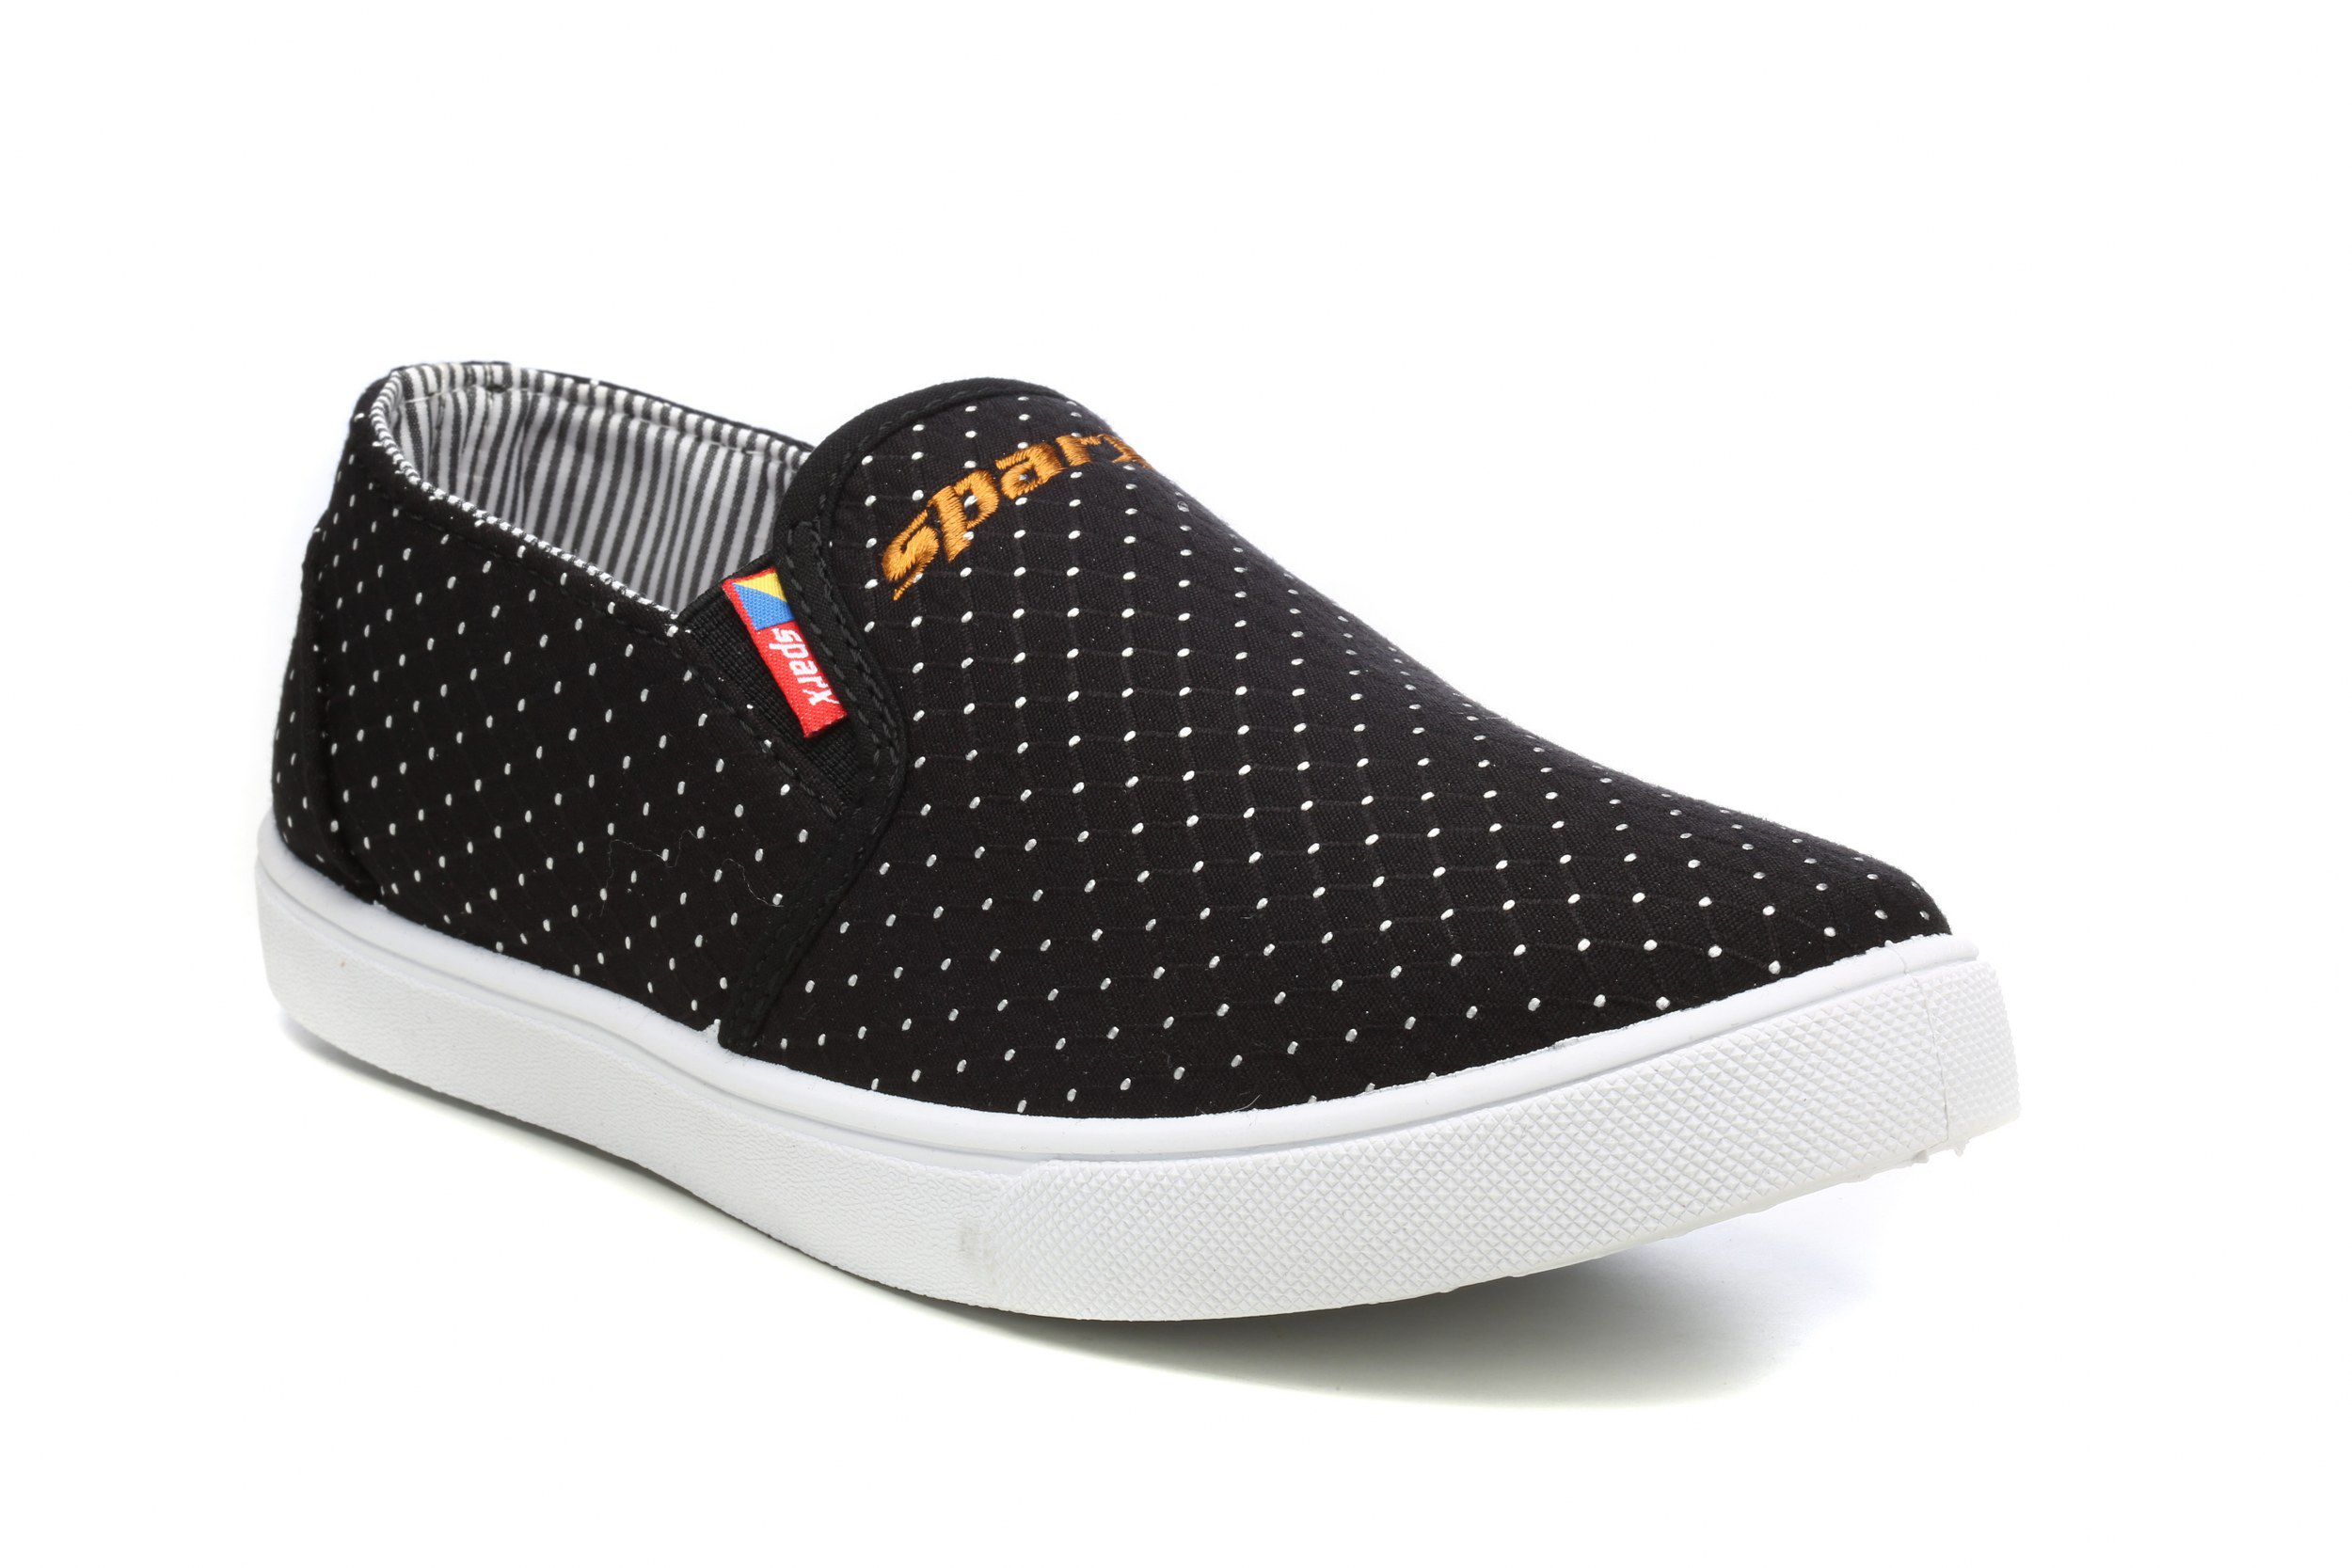 Sparx Lifestyle Black Casual Shoes - Buy Sparx Lifestyle Black Casual ...